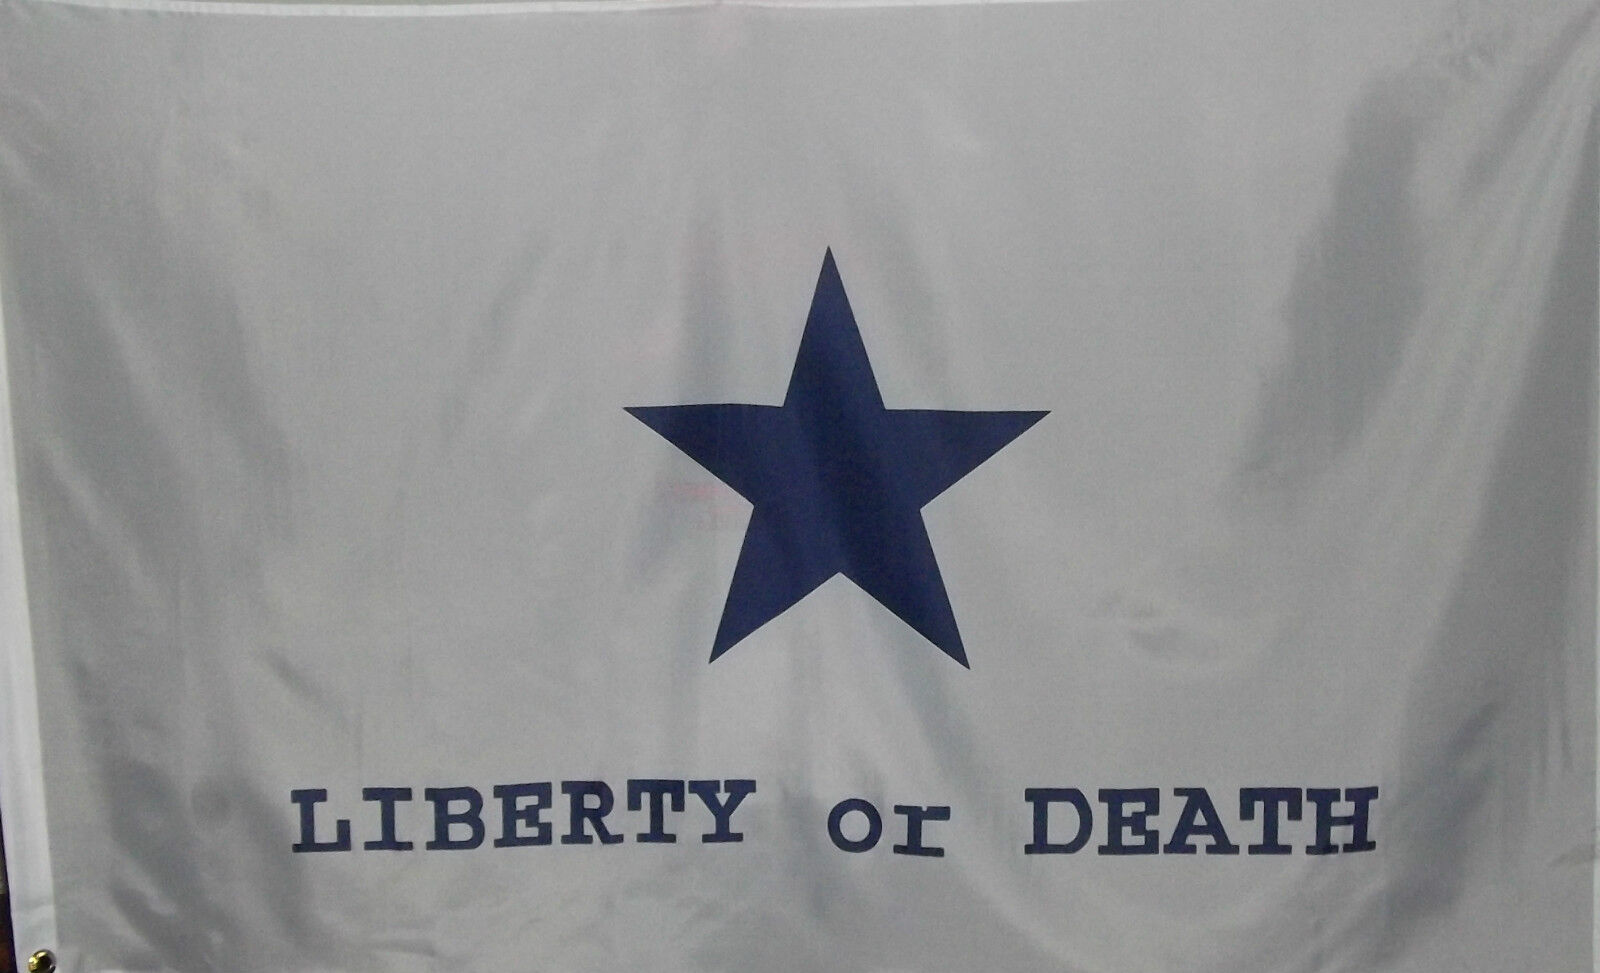 TEXAS GOLIAD BATTLE FLAG - LIBERTY OR DEATH - TX INDEPENDENCE HEROES - REPUBLIC